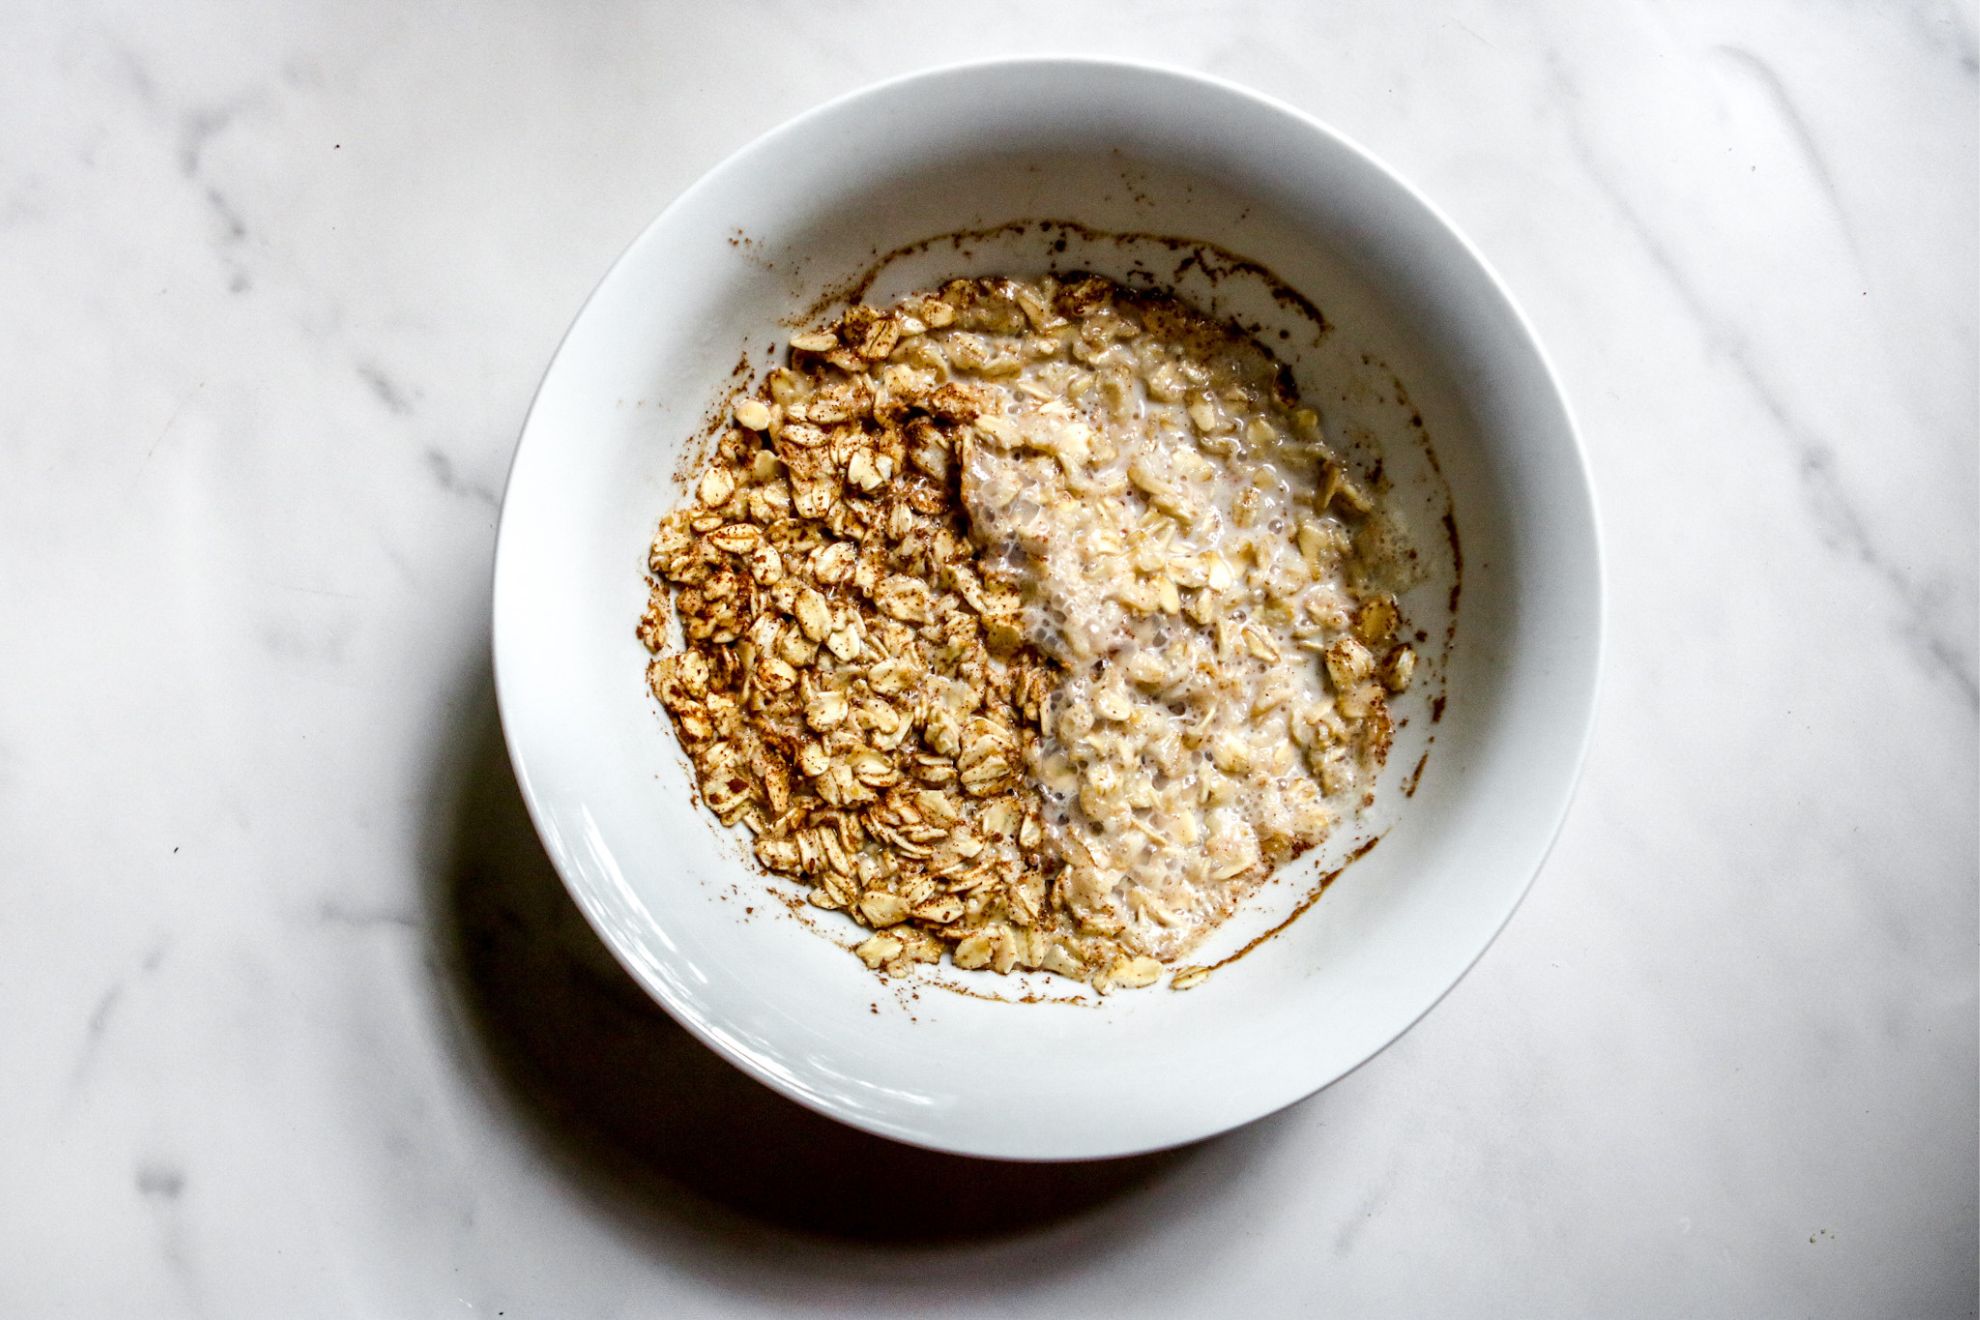 This is an overhead horizontal image of a white bowl on a white marble surface. In the bowl is cooked oatmeal.